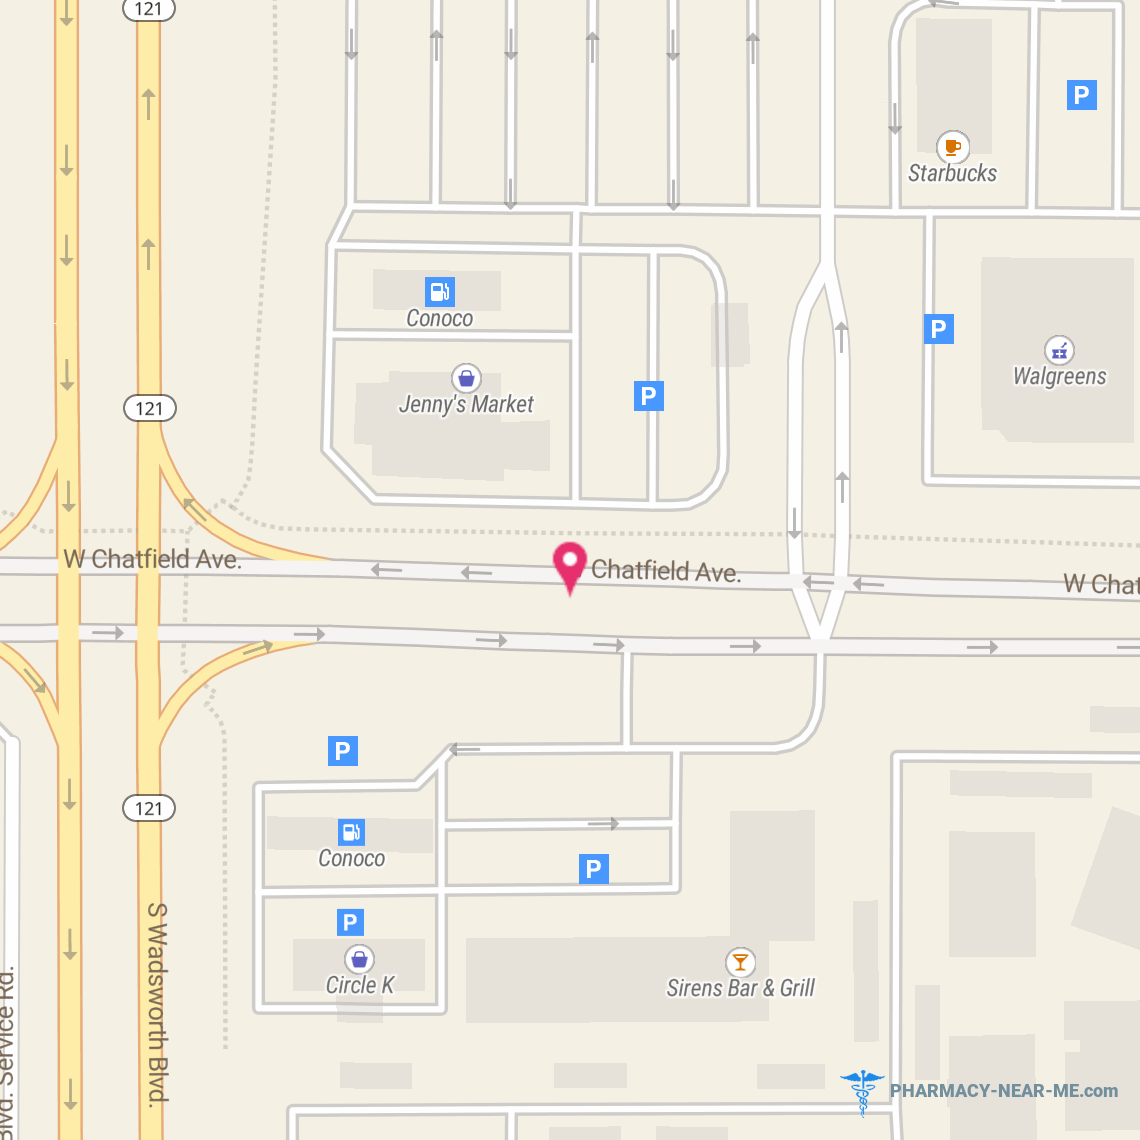 WALGREENS #09607 - Pharmacy Open Hours, Phone, Reviews & Information: 7443 W Chatfield Ave, Columbine, CO 80128